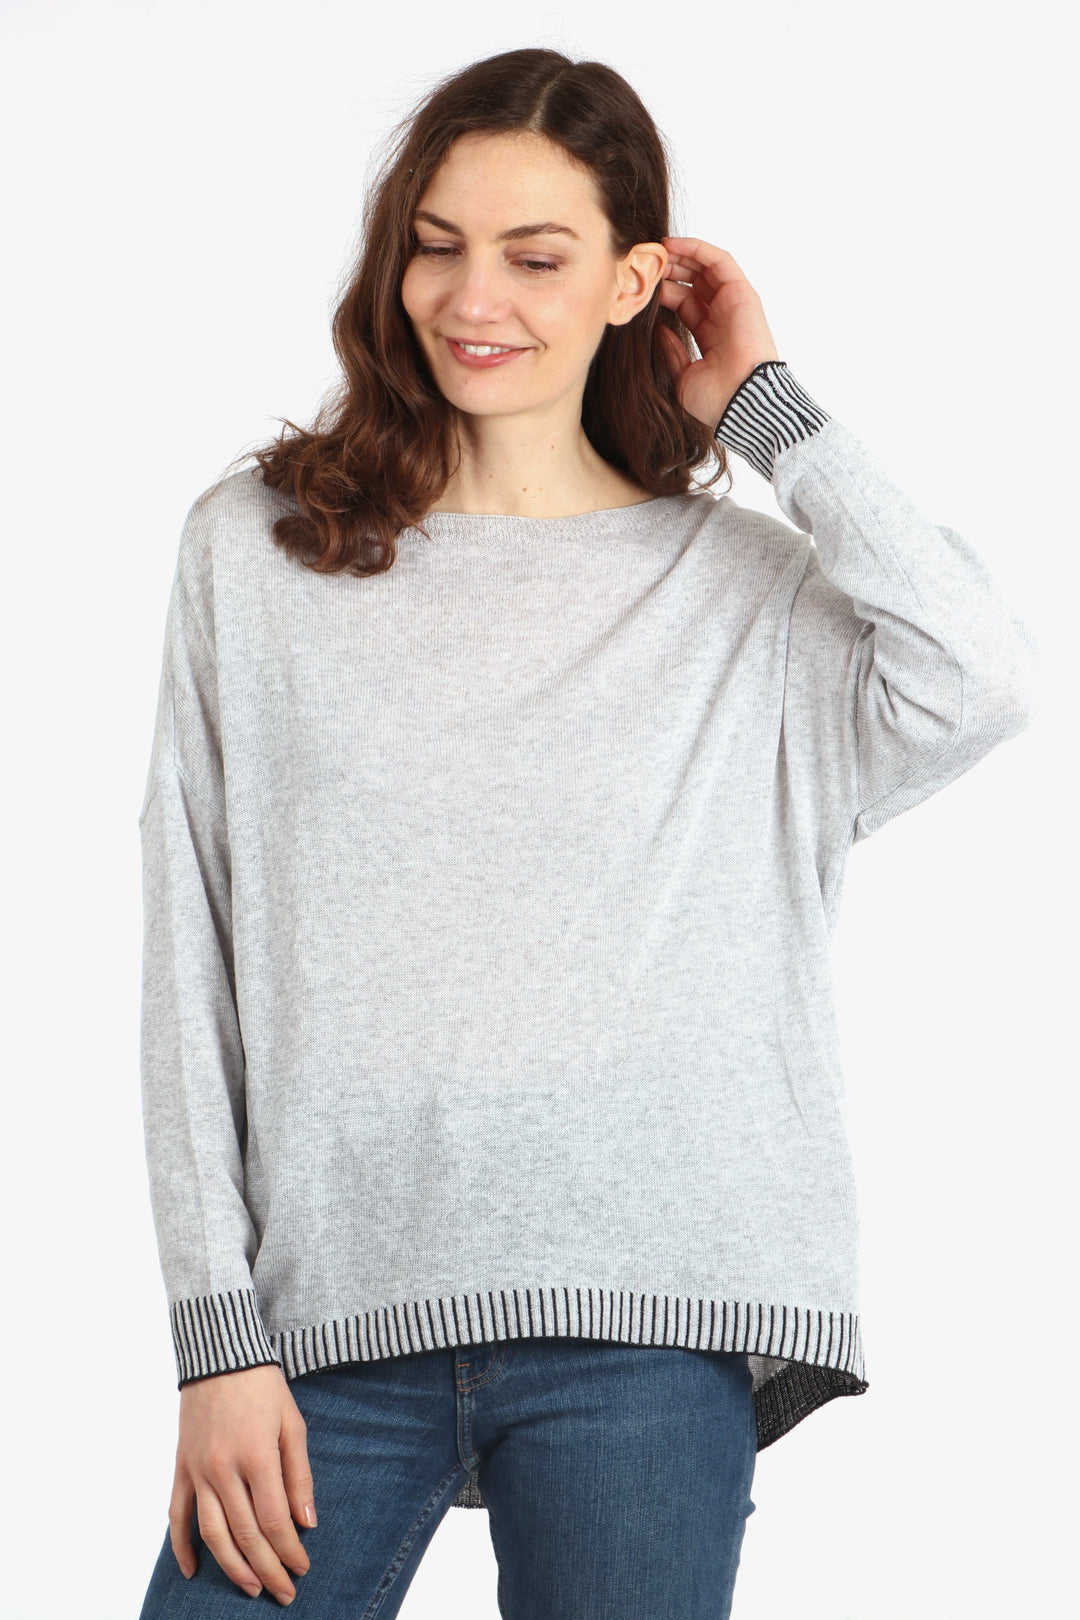 model wearing a long sleeved cotton jumper in light grey with a contrasting black stitched hem and cuff